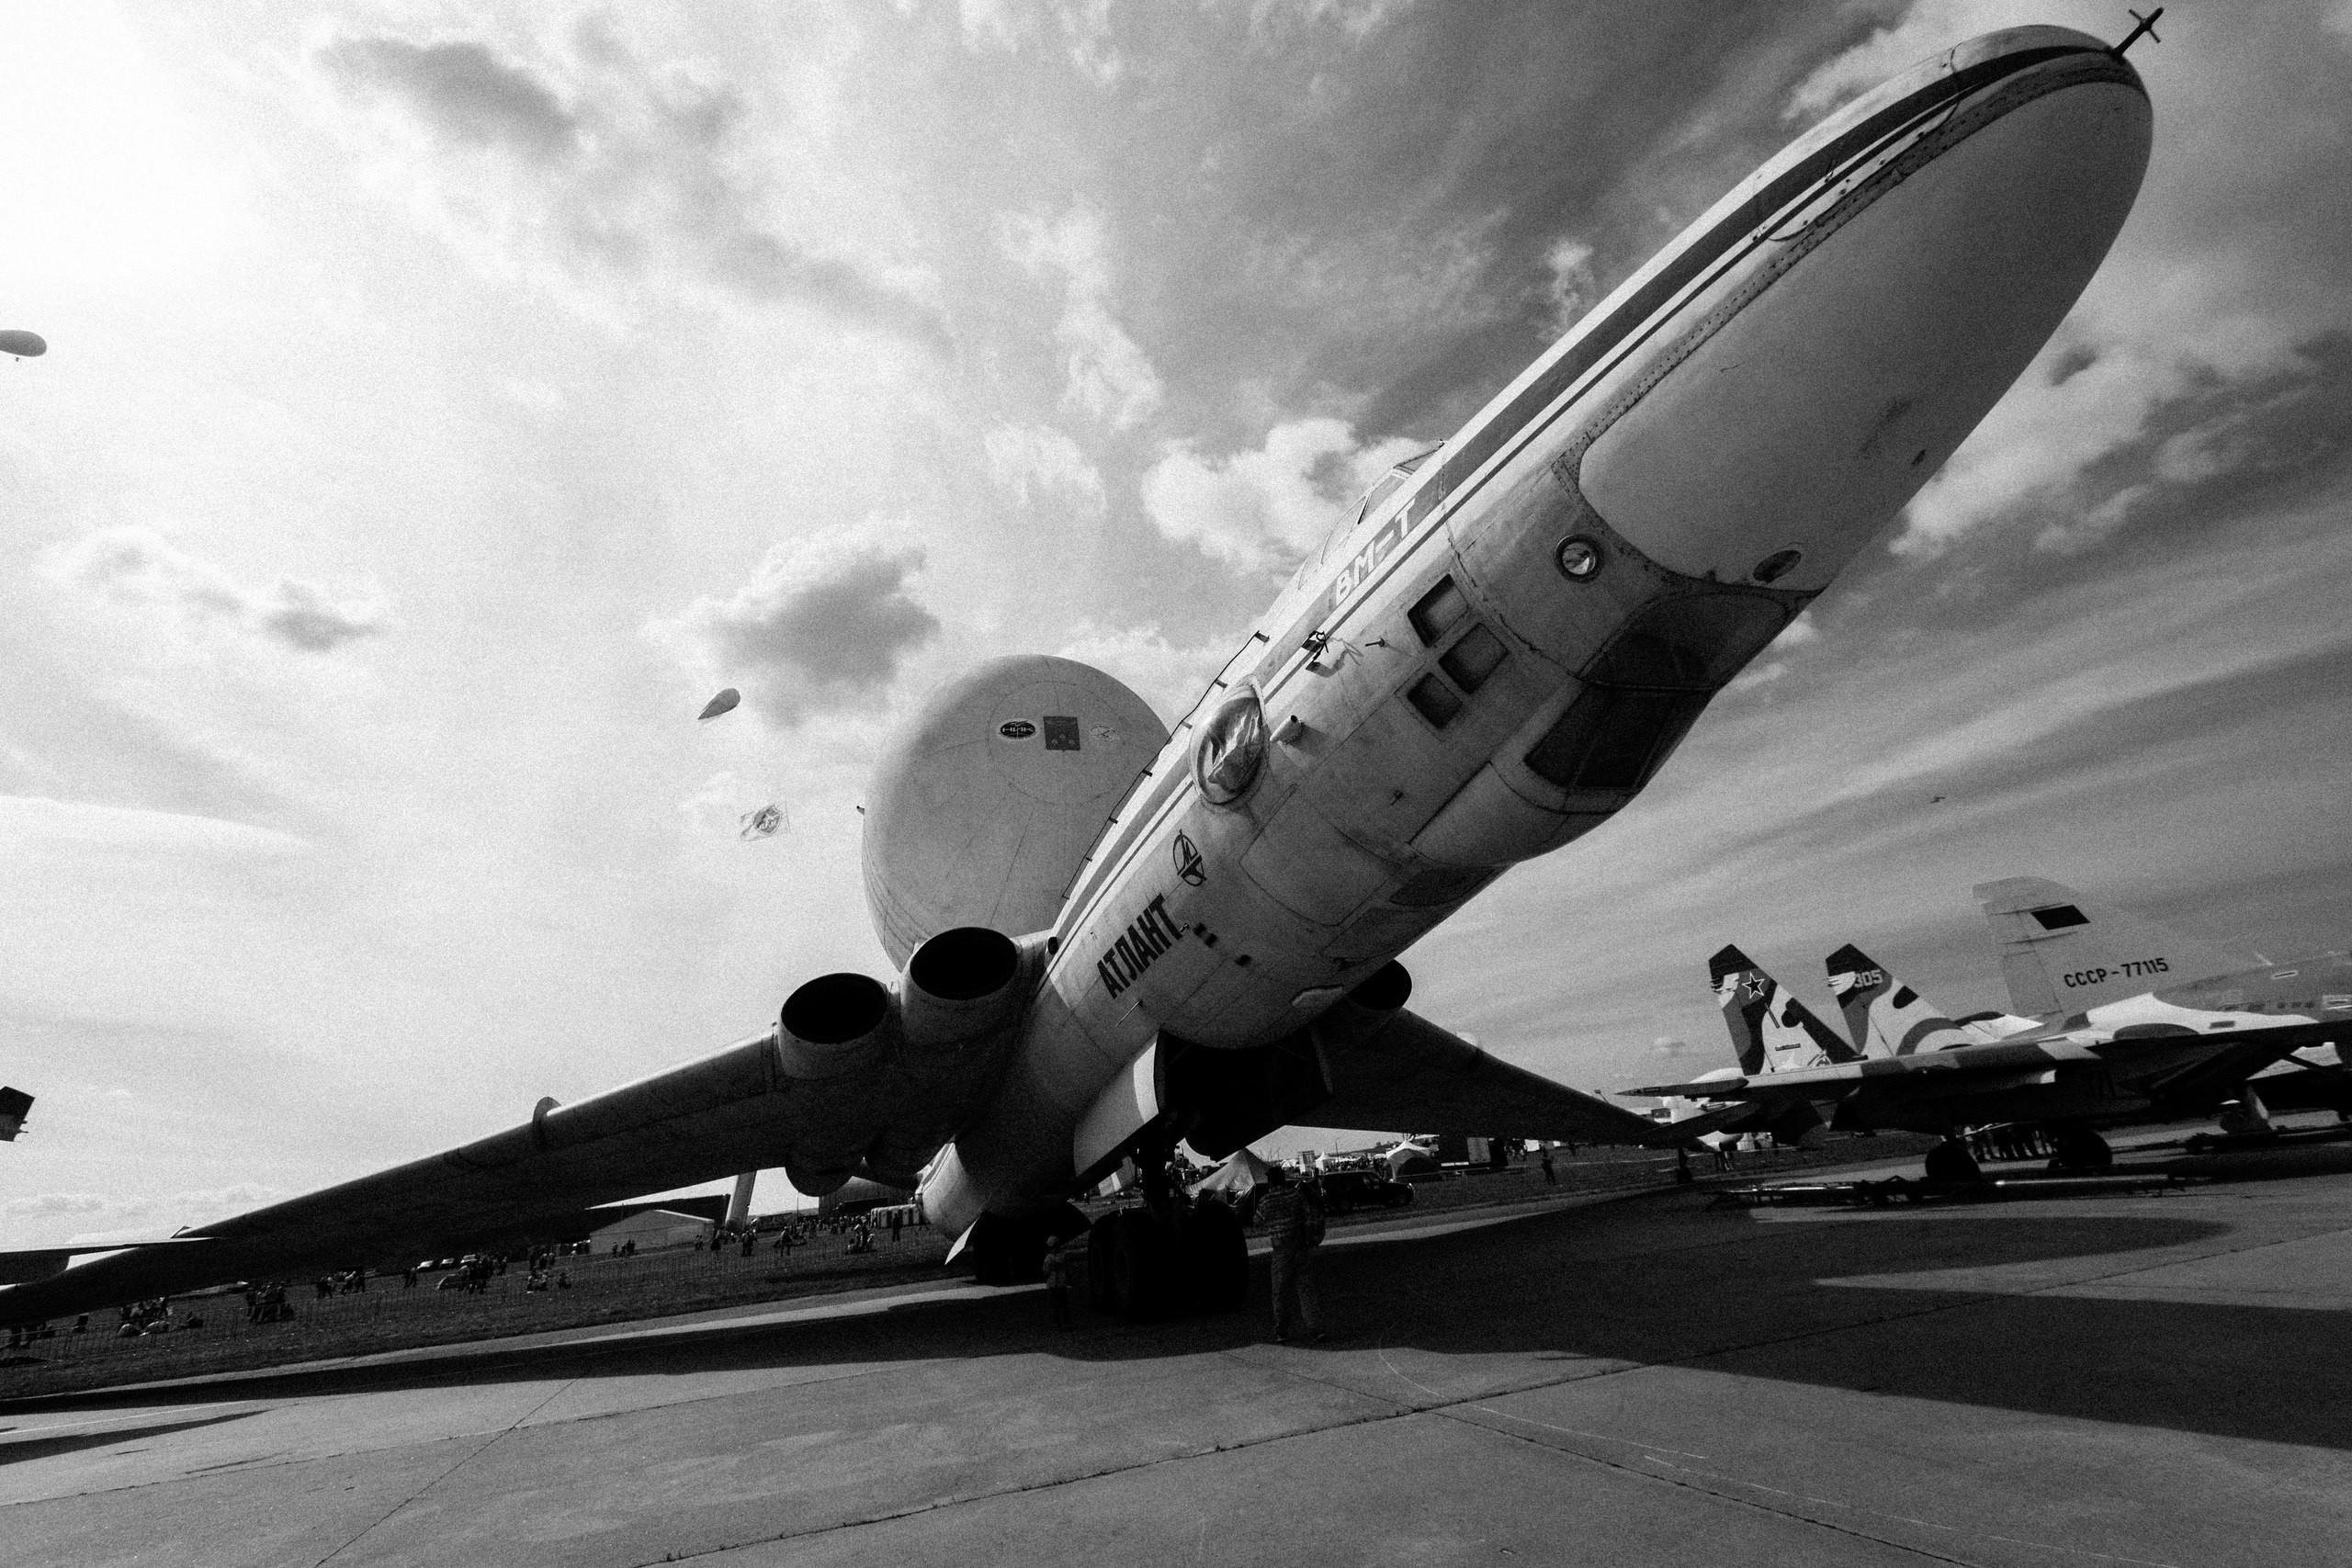 General 2560x1707 monochrome aircraft vehicle USSR Russian/Soviet aircraft worm's eye view sky clouds